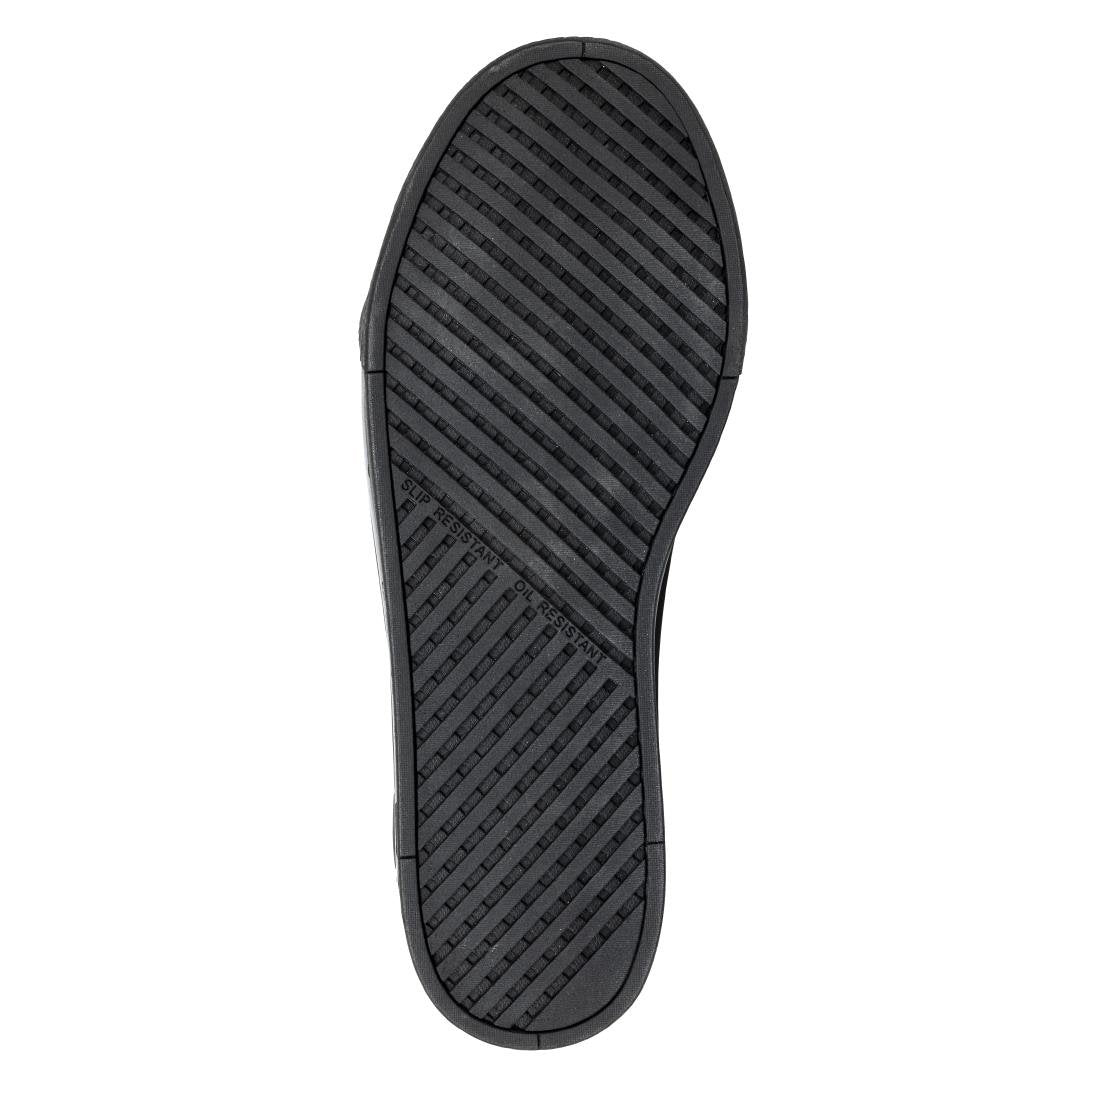 BA060-43 Slipbuster Recycled Microfibre Safety Trainers Matte Black 43 JD Catering Equipment Solutions Ltd